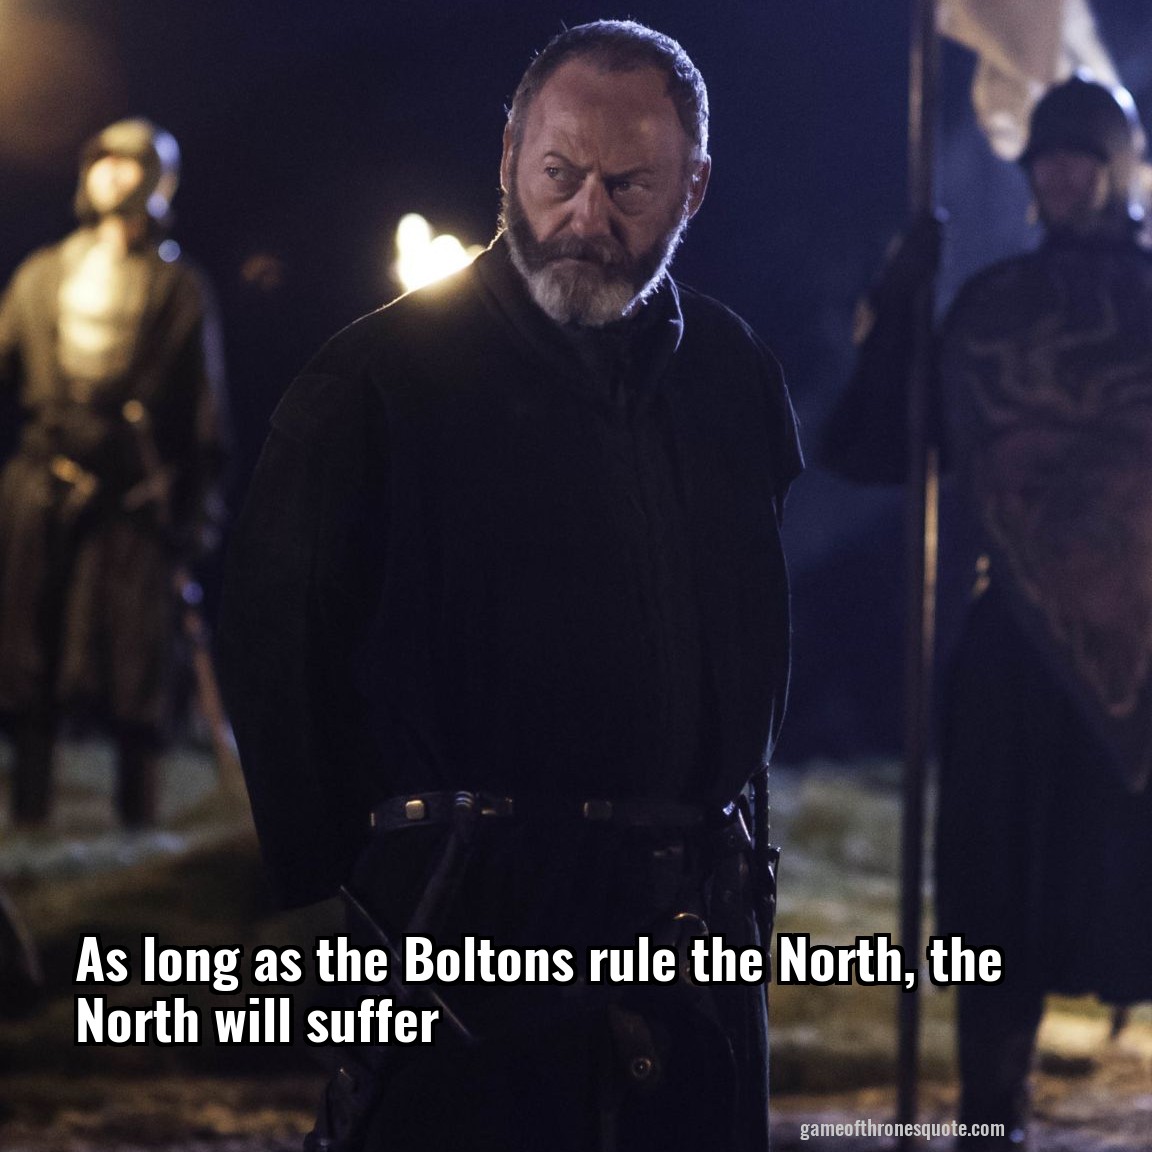 As long as the Boltons rule the North, the North will suffer